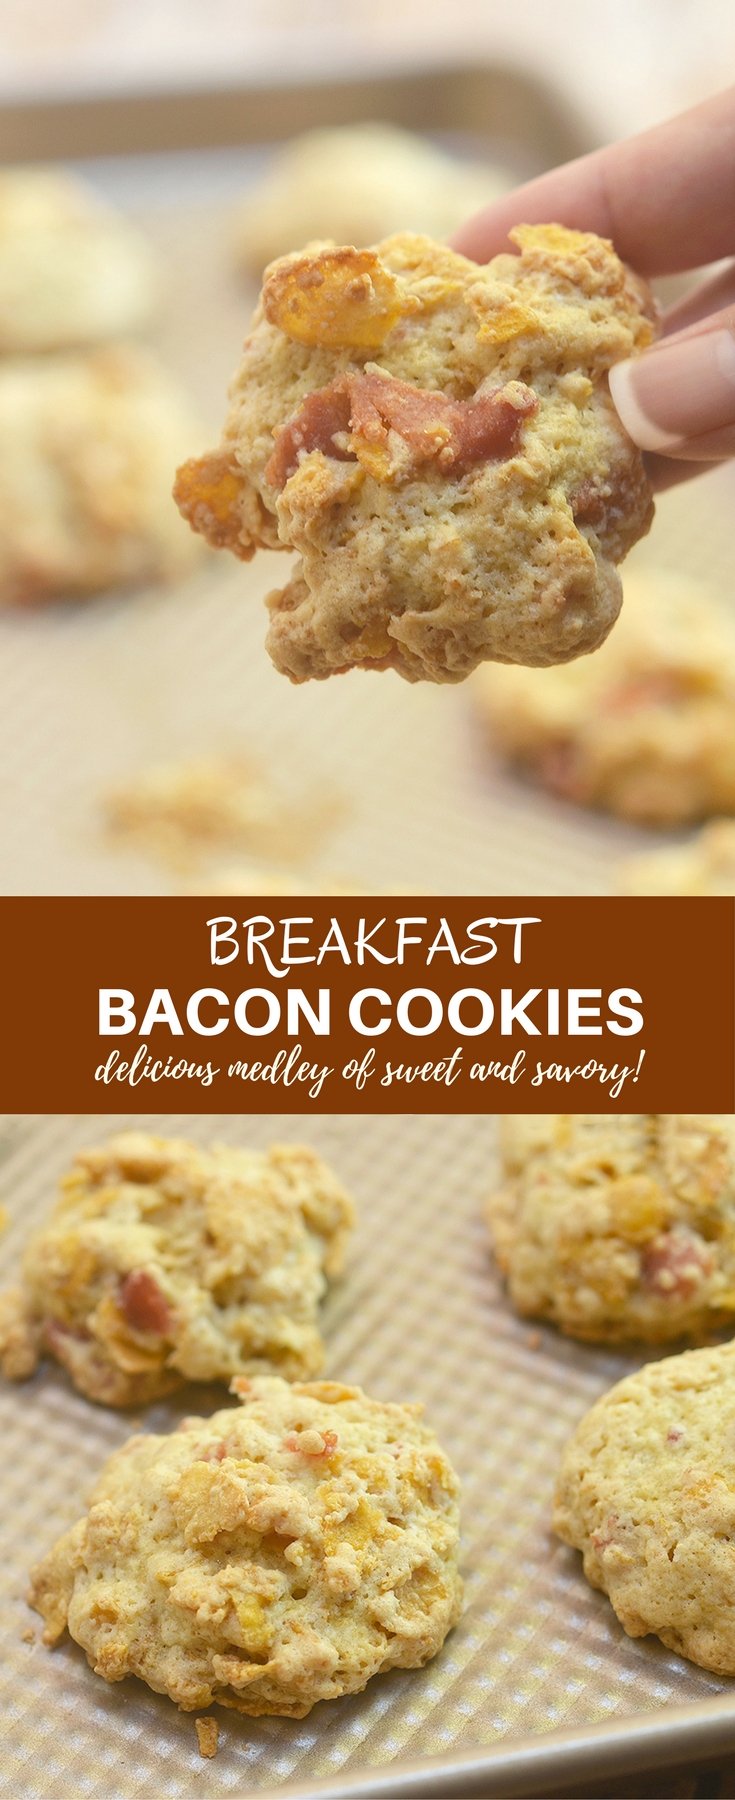 Breakfast Bacon Cookies with crisp bacon and cornflakes are the ultimate treat to kick-start your morning. They're crisp, chewy and a delicious medley with sweet and savory!